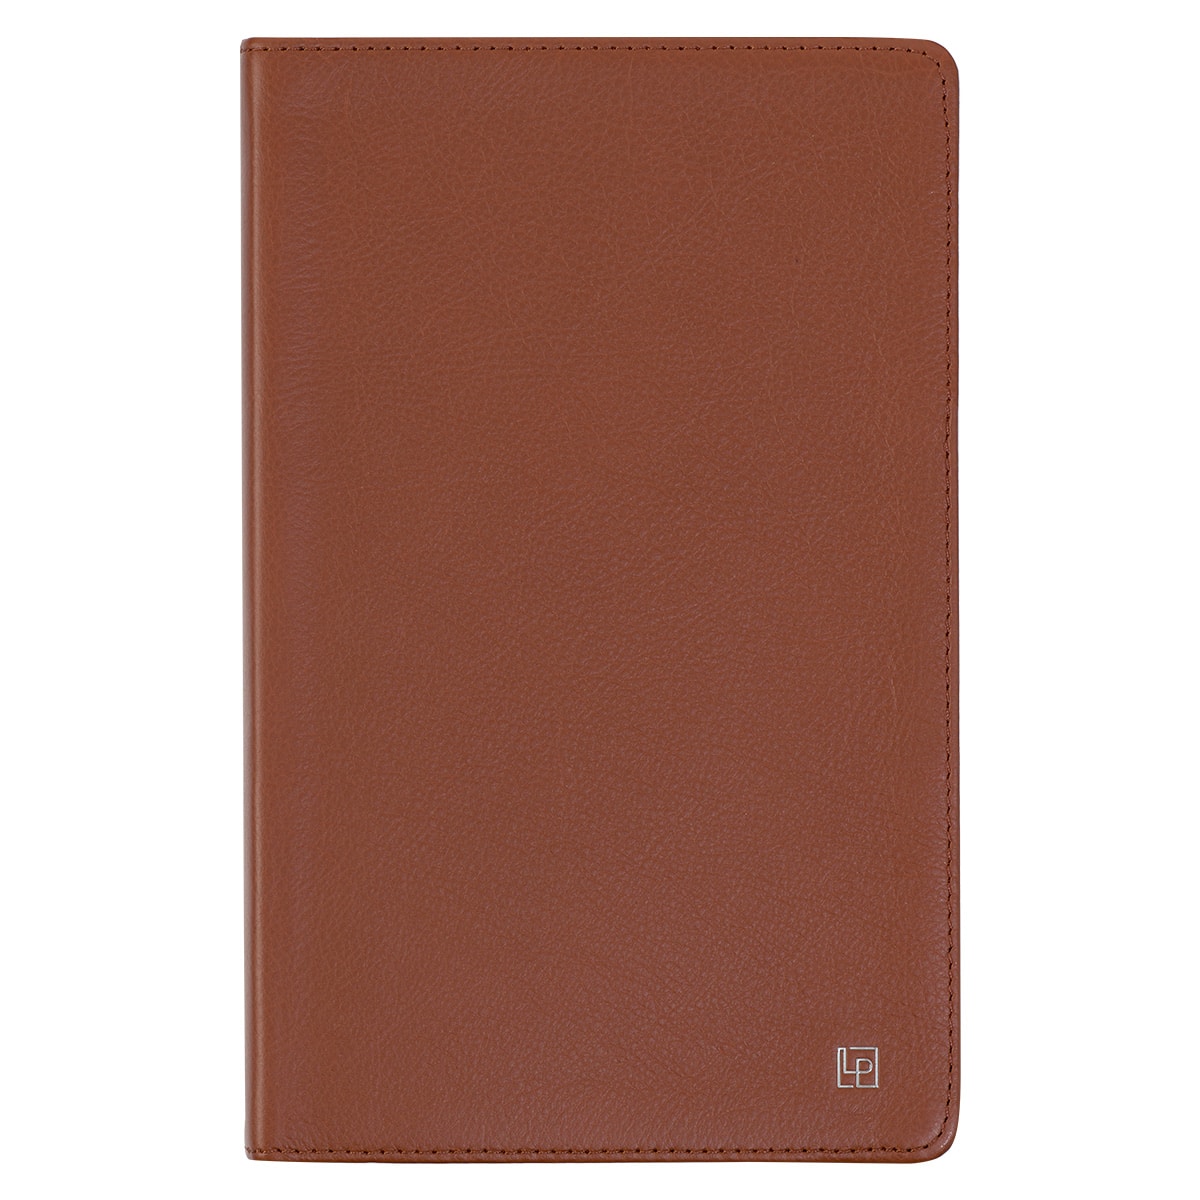 Chesterfield Tan Leather Journal